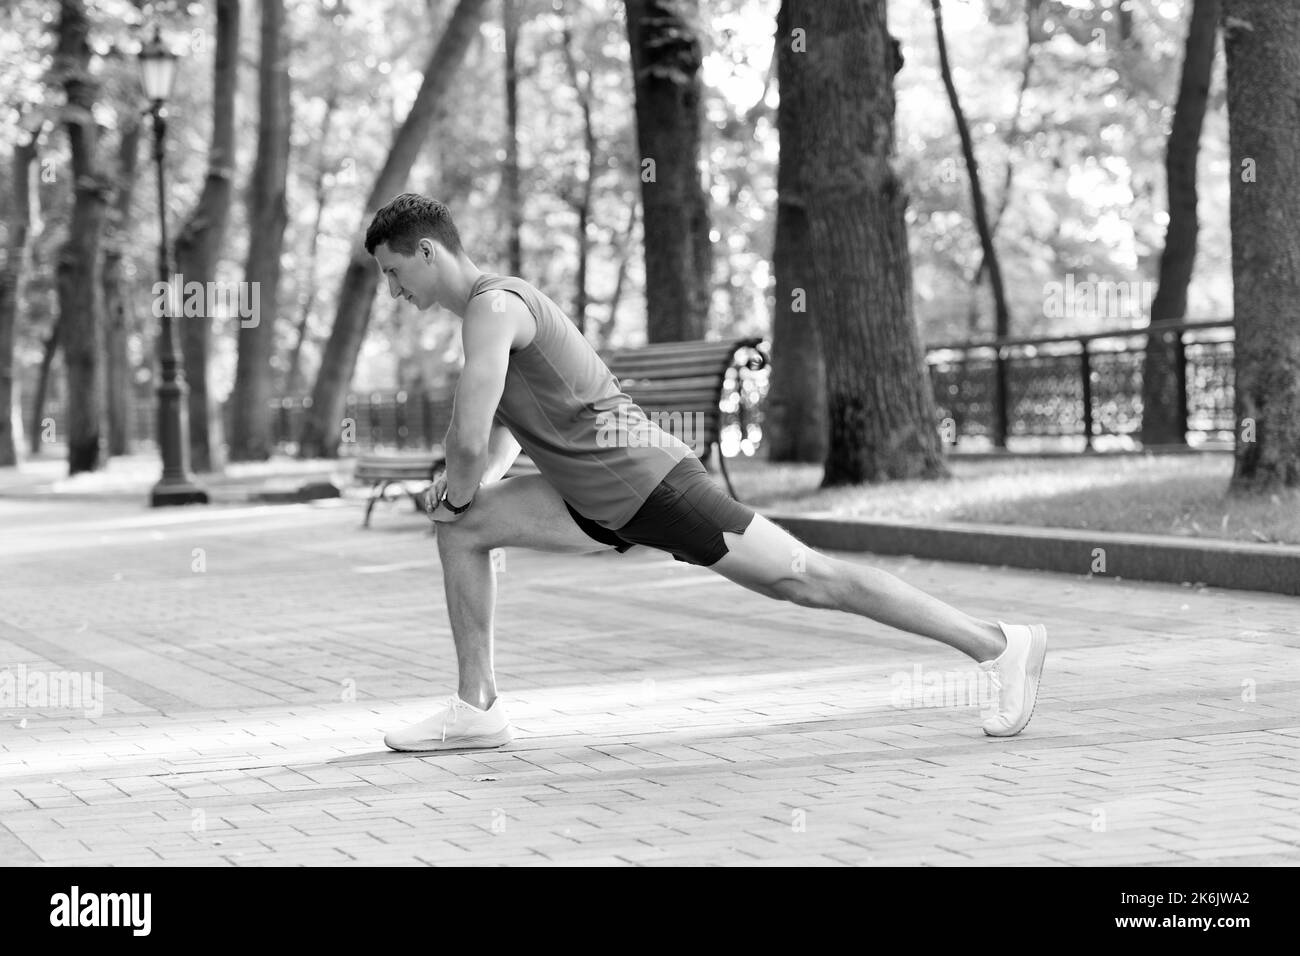 Sportsman hold lunge position doing stretch routine during outdoor athletic workout in park, warmup Stock Photo